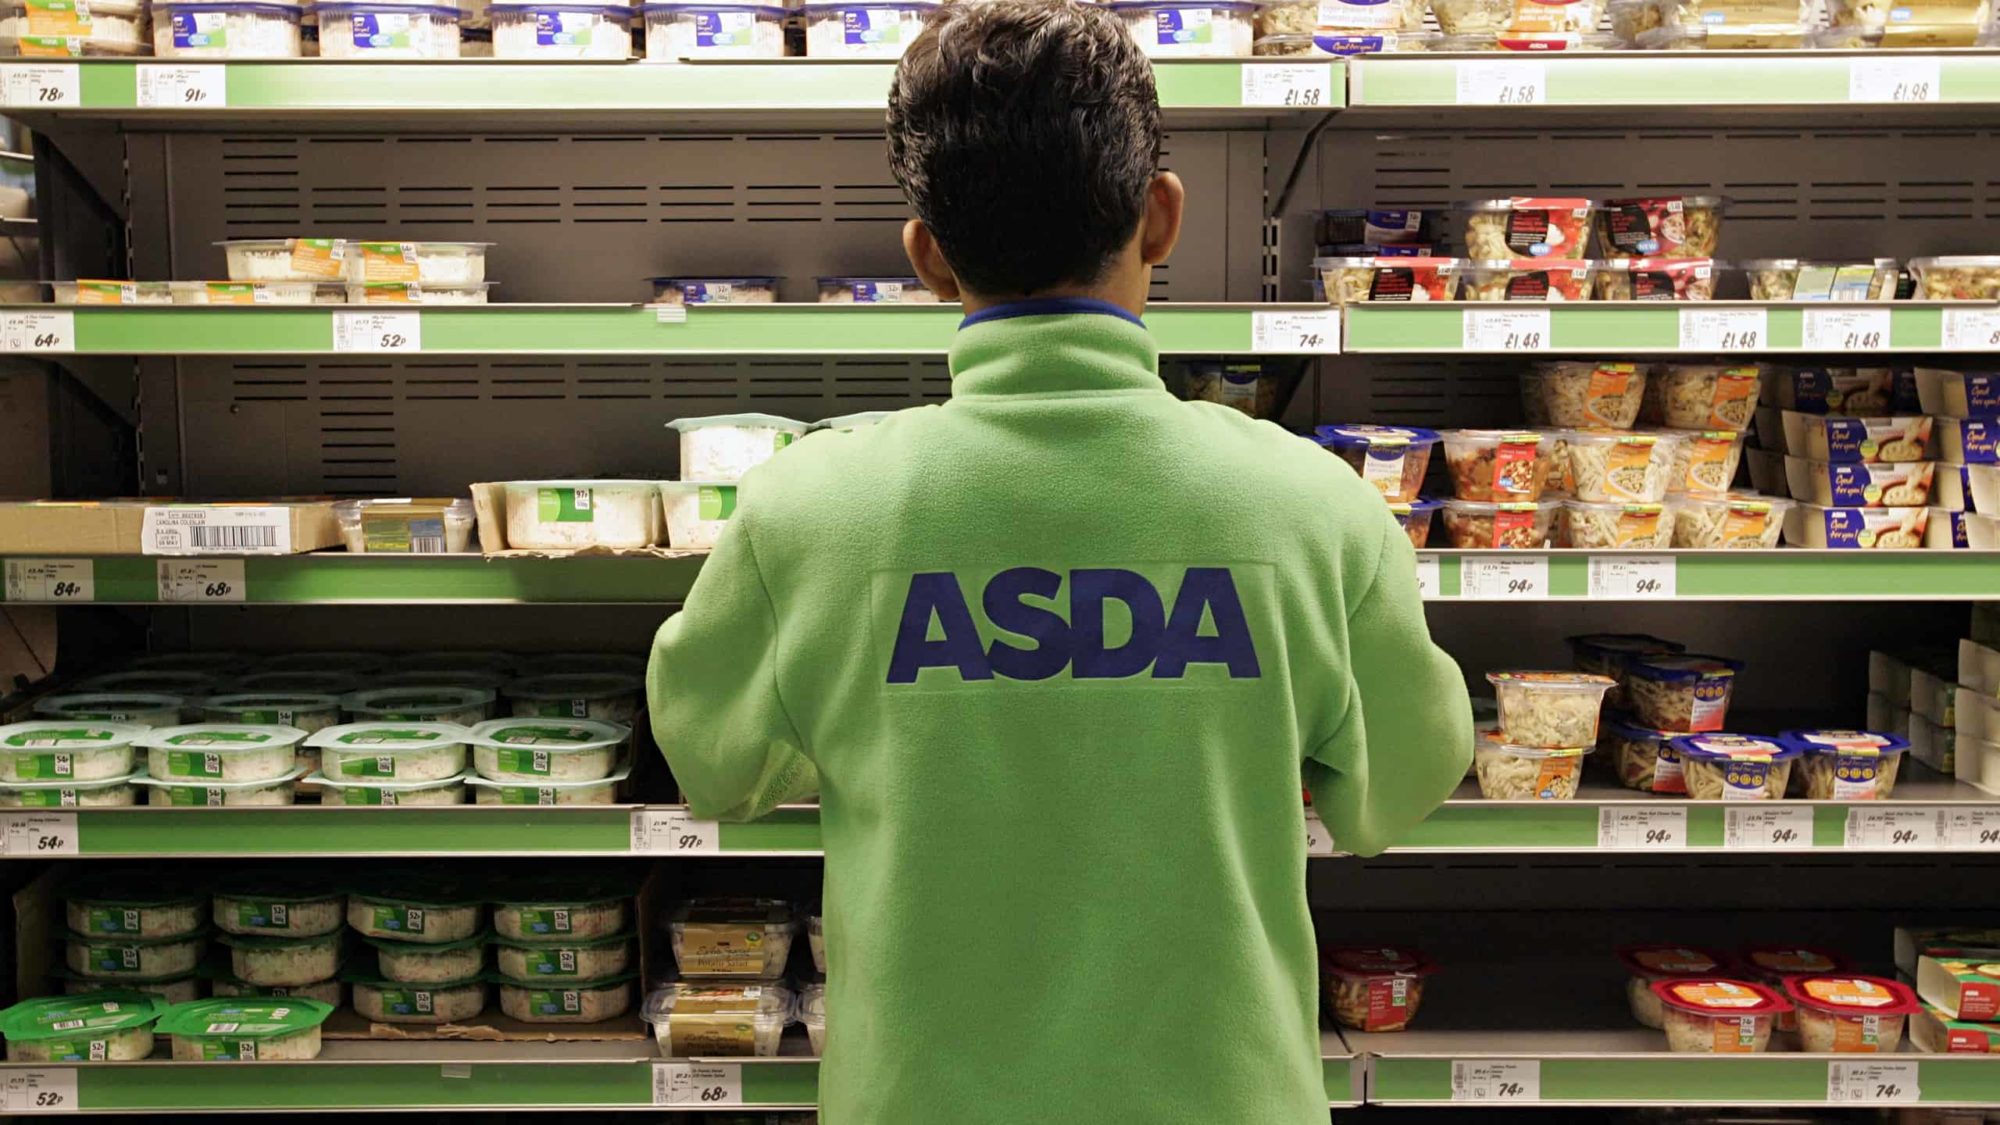 Asda stores to close on Boxing Day to reward colleagues